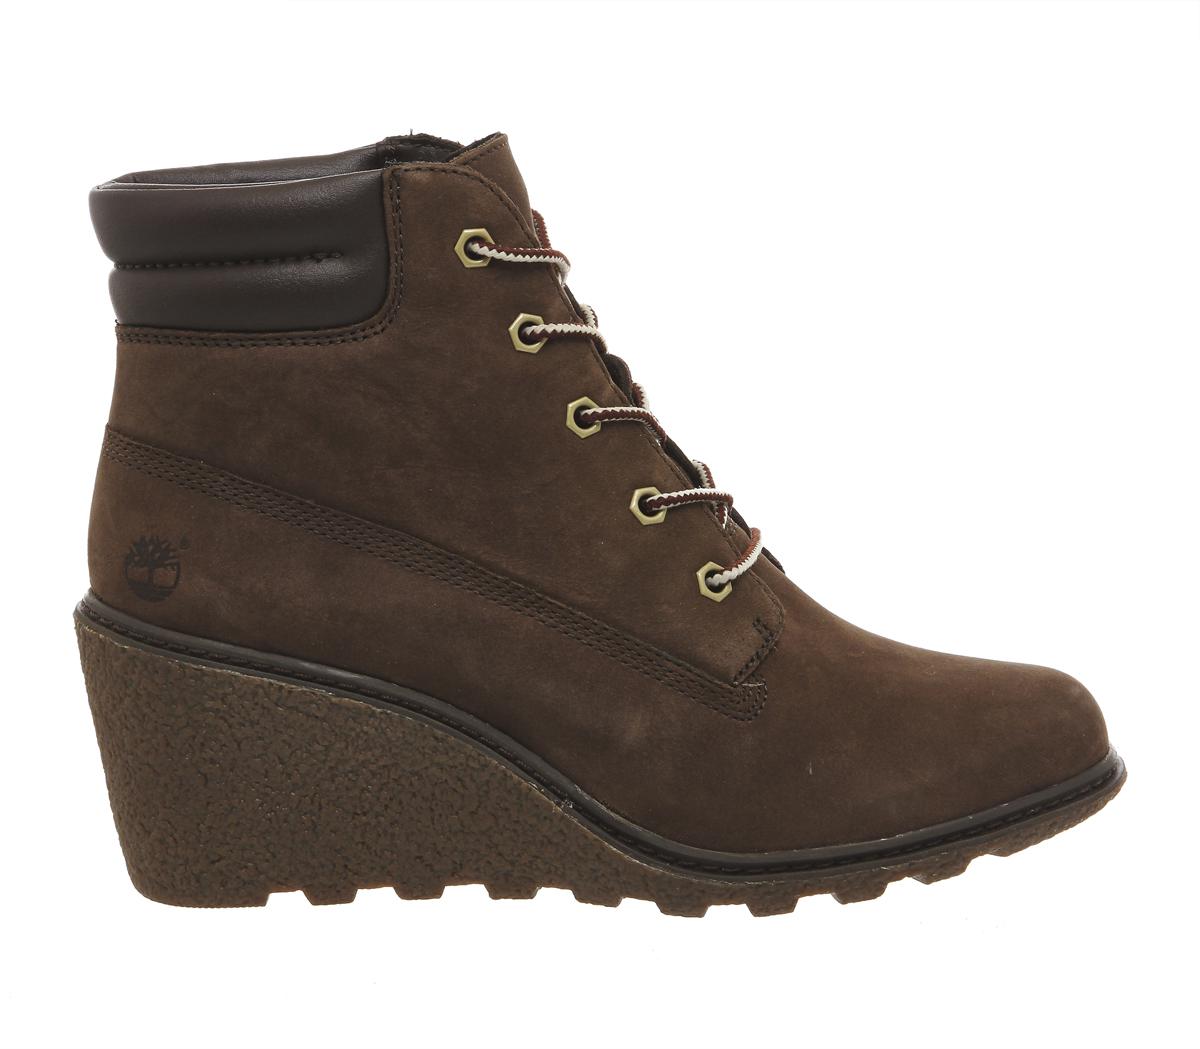 Timberland Leather Amston 6 Inch Wedge Ankle Boots in Brown - Lyst